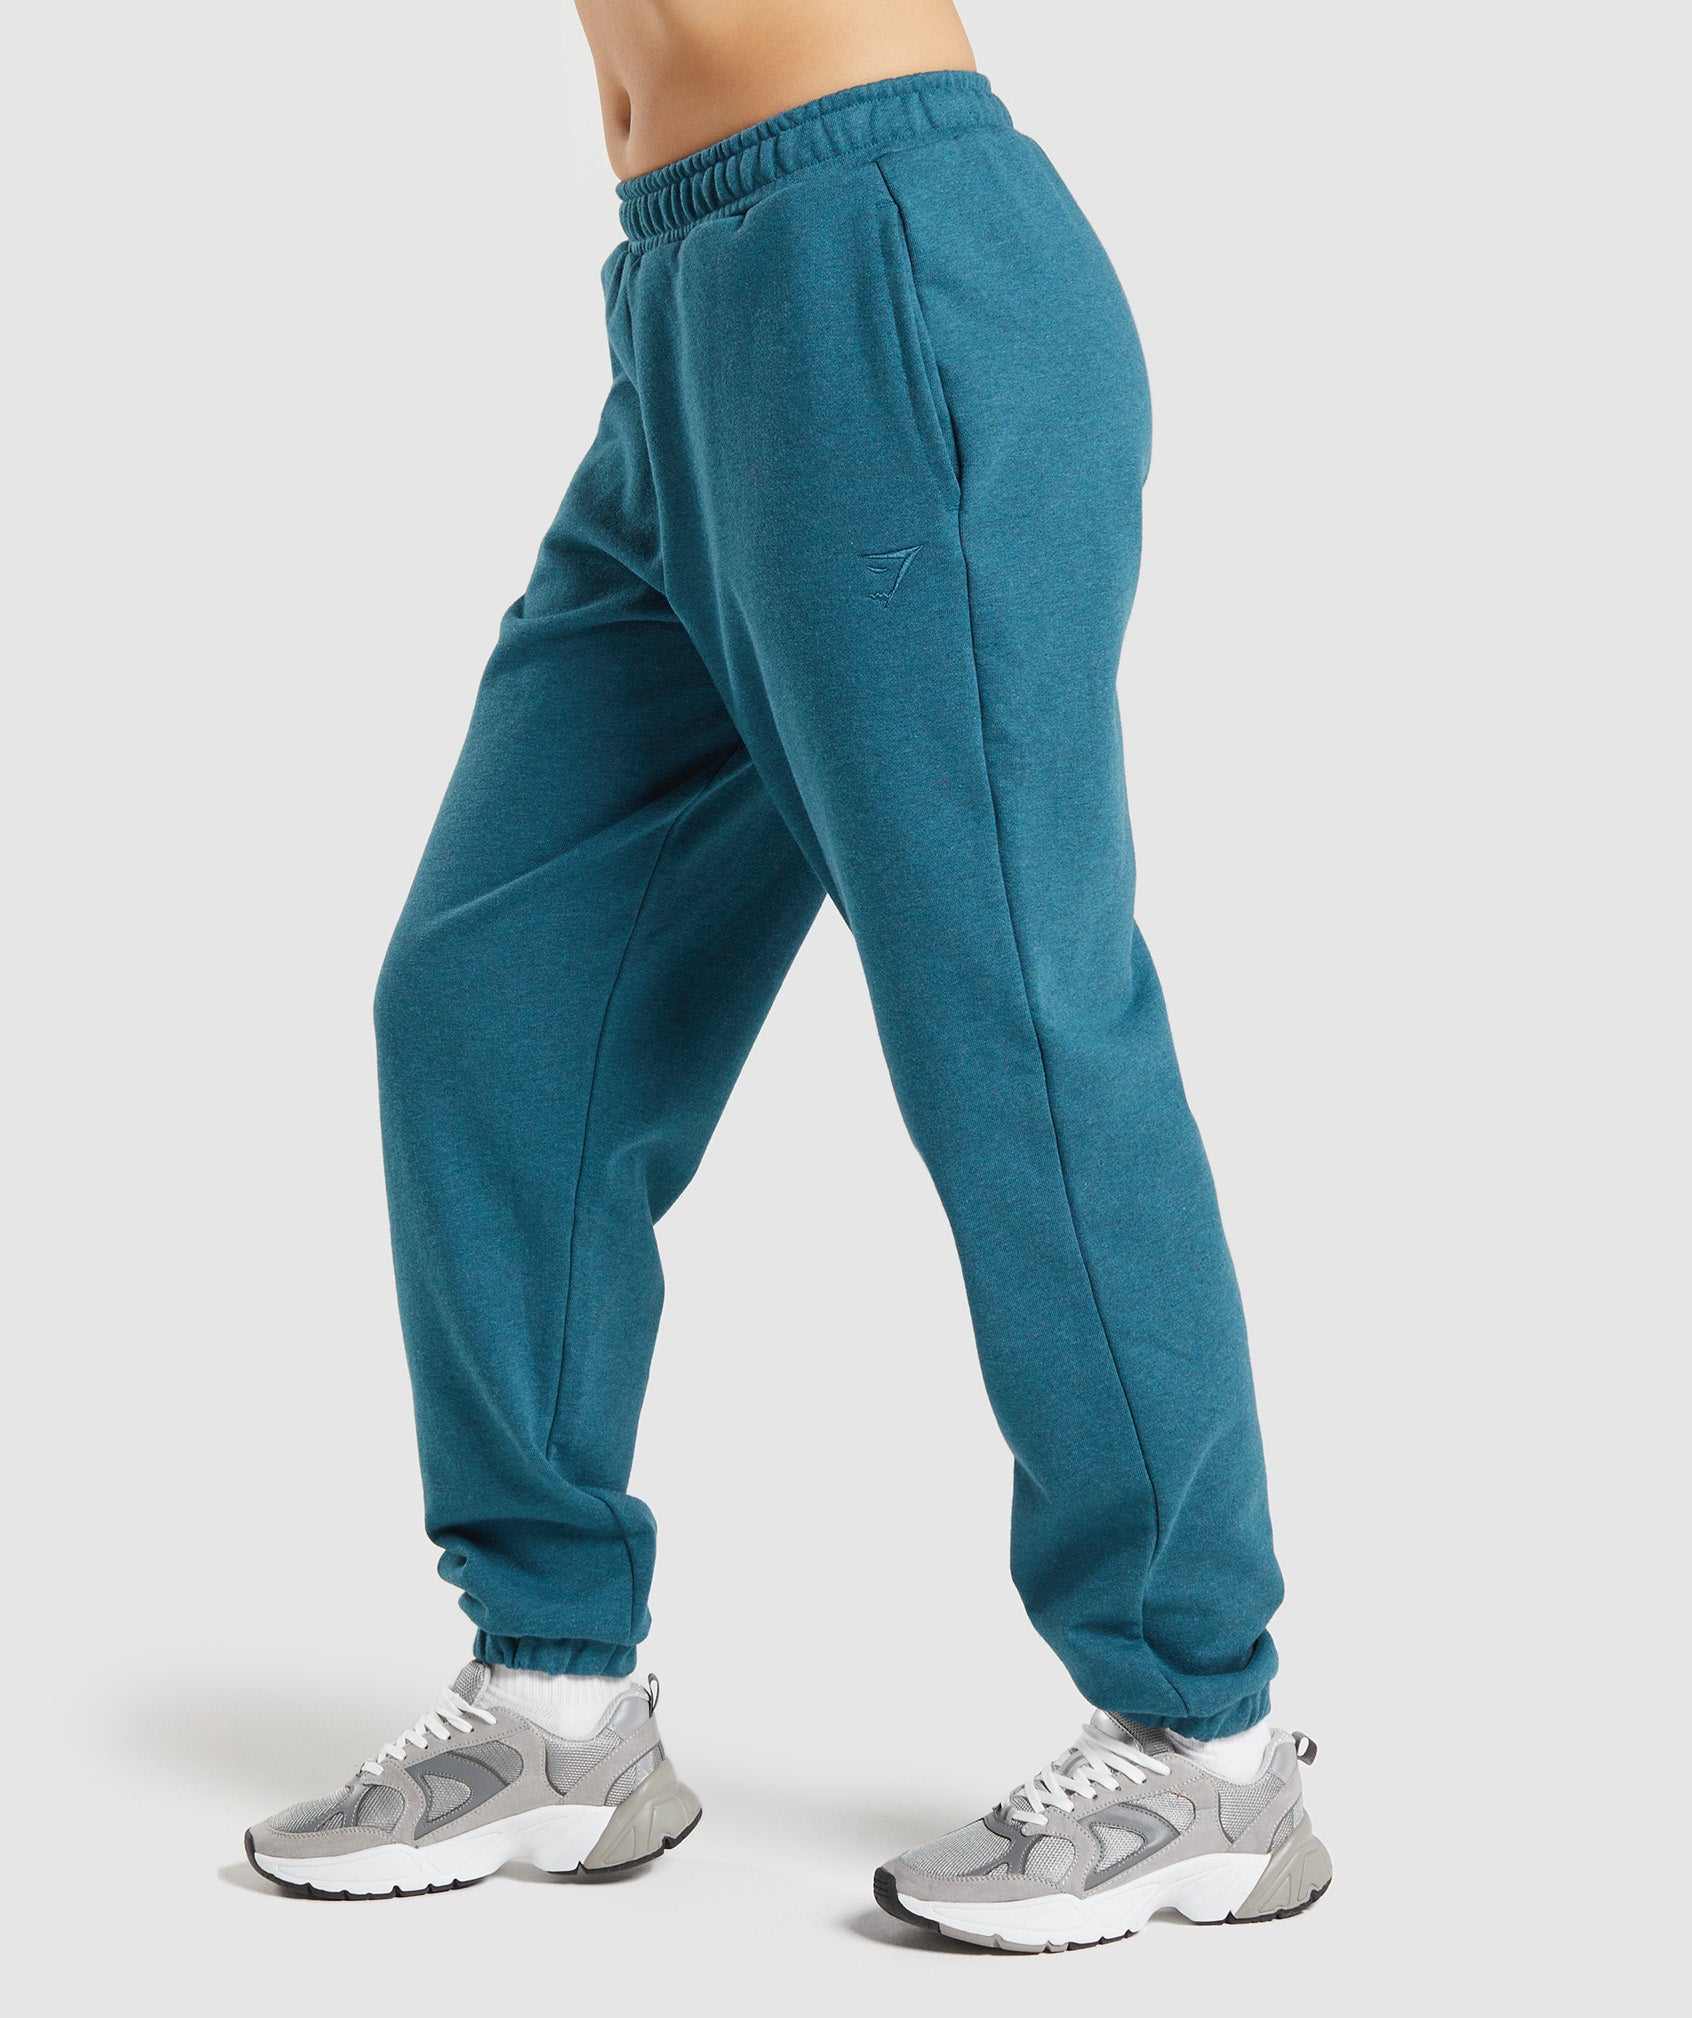 Rest Day Sweats Joggers in Steel Blue Marl - view 3